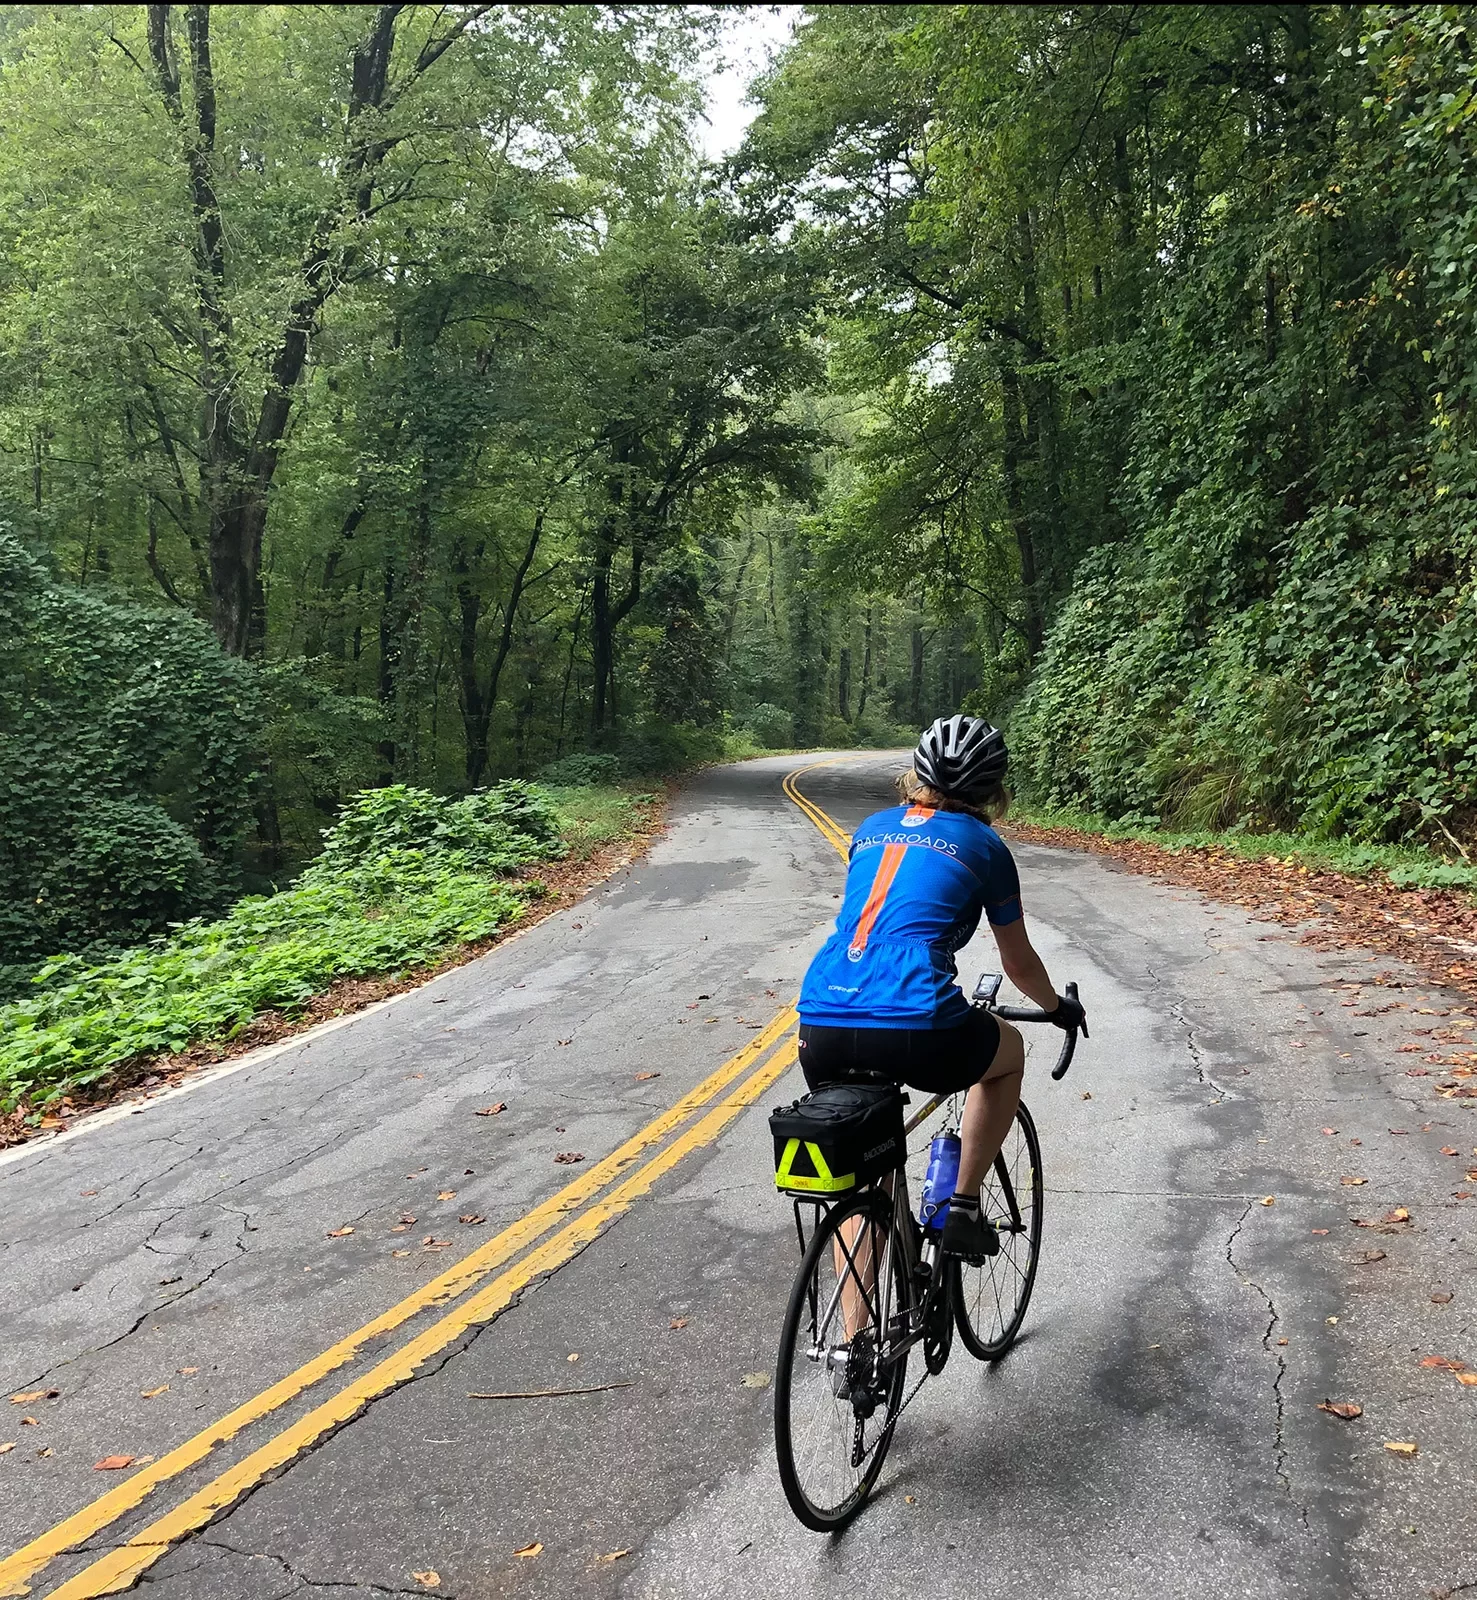 Guest biking down shady, forested road.